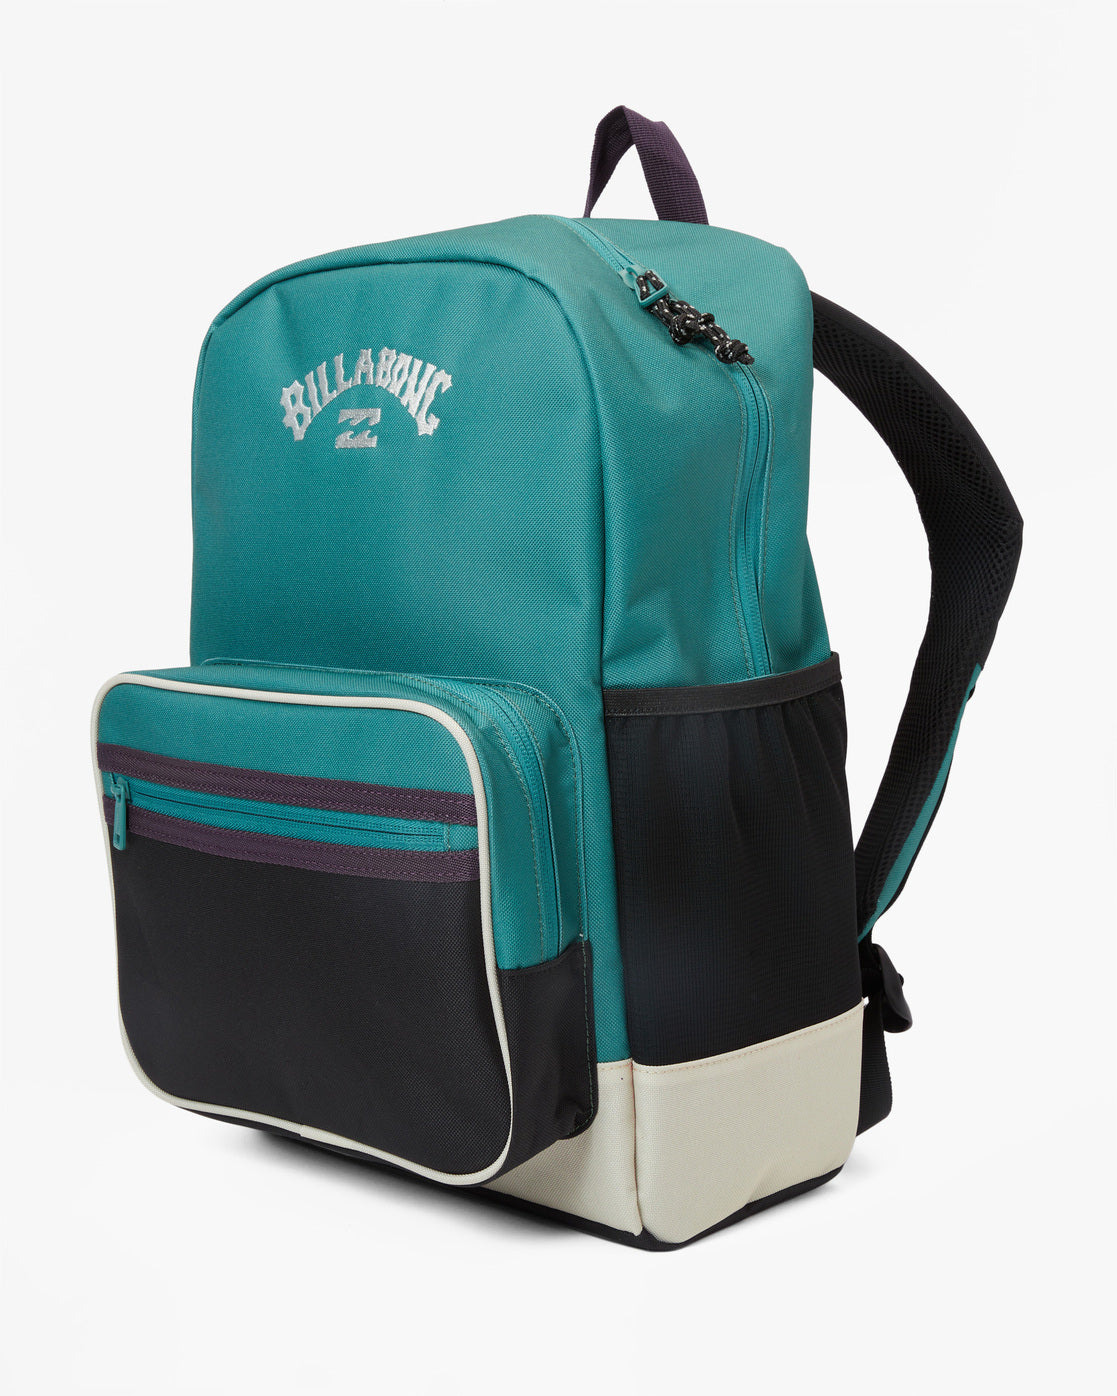 Billabong All Day Plus Backpack.